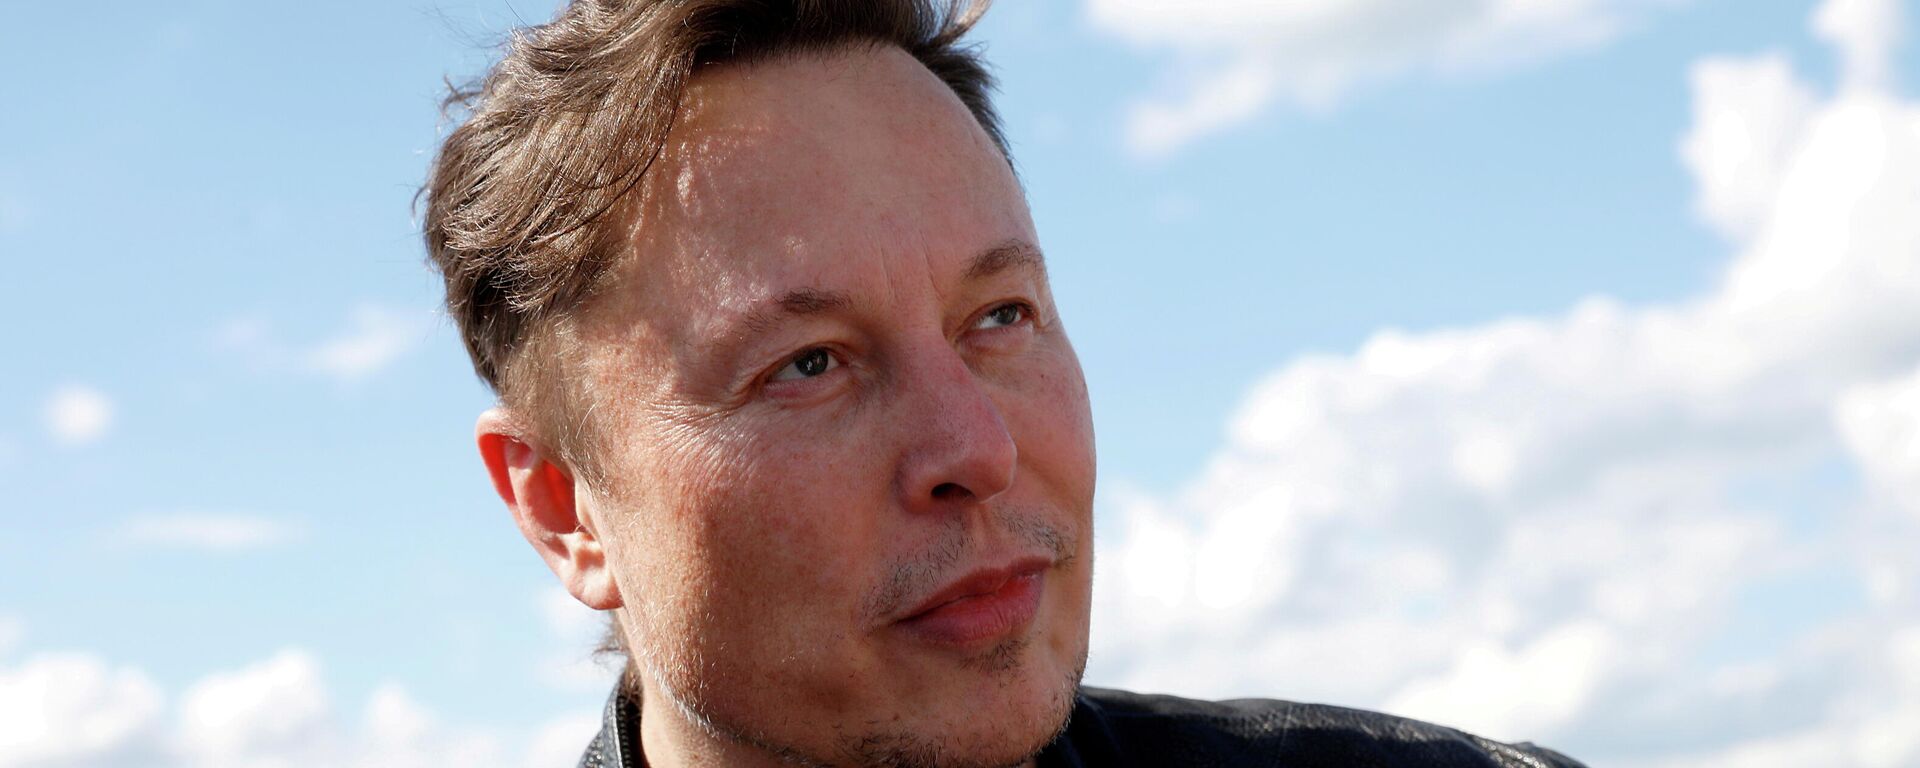 SpaceX founder and Tesla CEO Elon Musk looks on as he visits the construction site of Tesla's gigafactory in Gruenheide, near Berlin, Germany, May 17, 2021. - Sputnik International, 1920, 01.12.2021